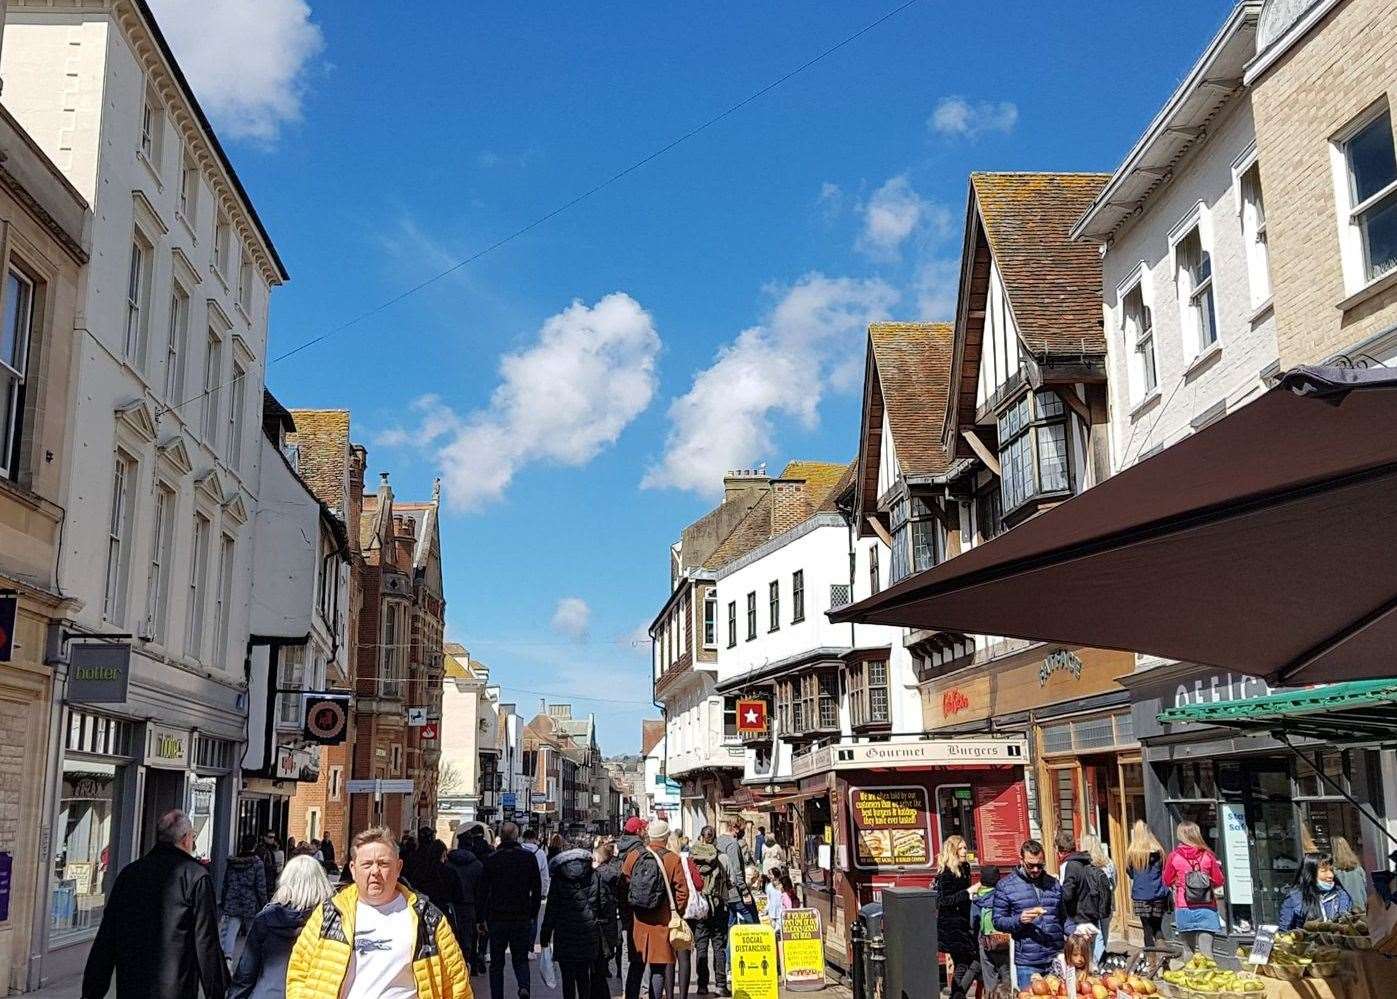 Canterbury city centre was heaving with people on Saturday 17 - the first weekend since non-essential shops reopened